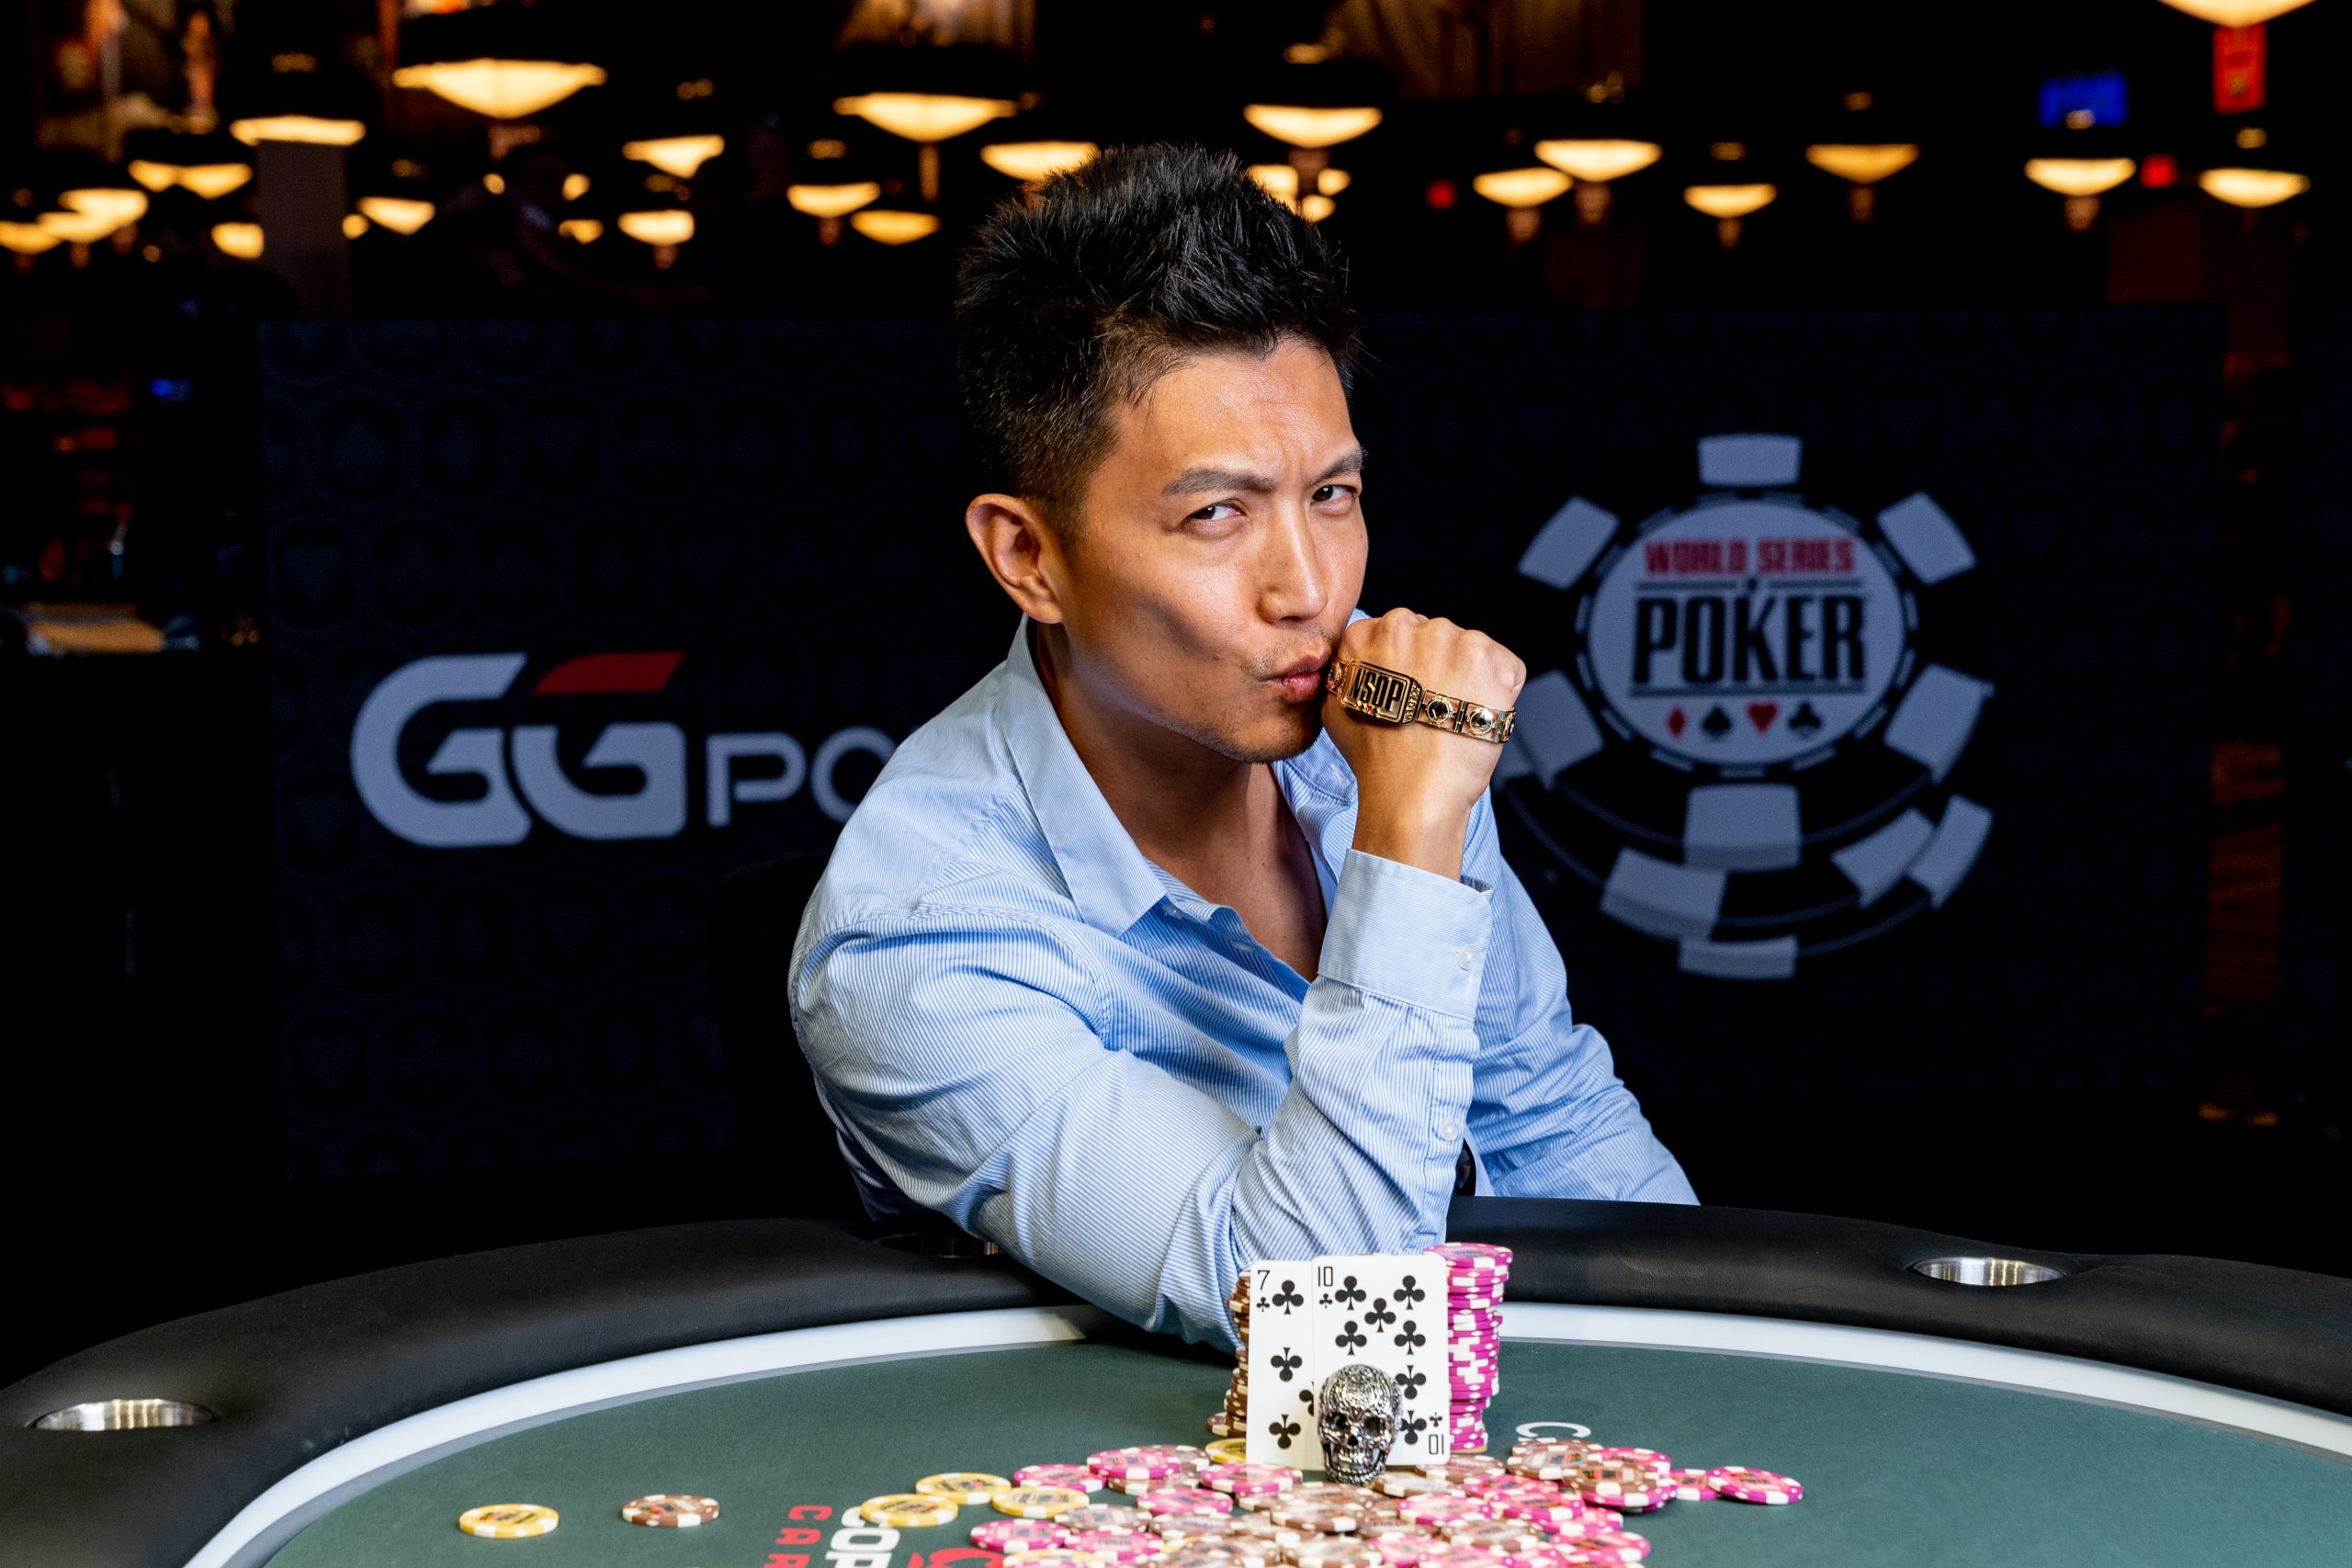 WSOP Update: Nevada Players Lead the Bracelet Race, International Players Not Much of a Factor So Far